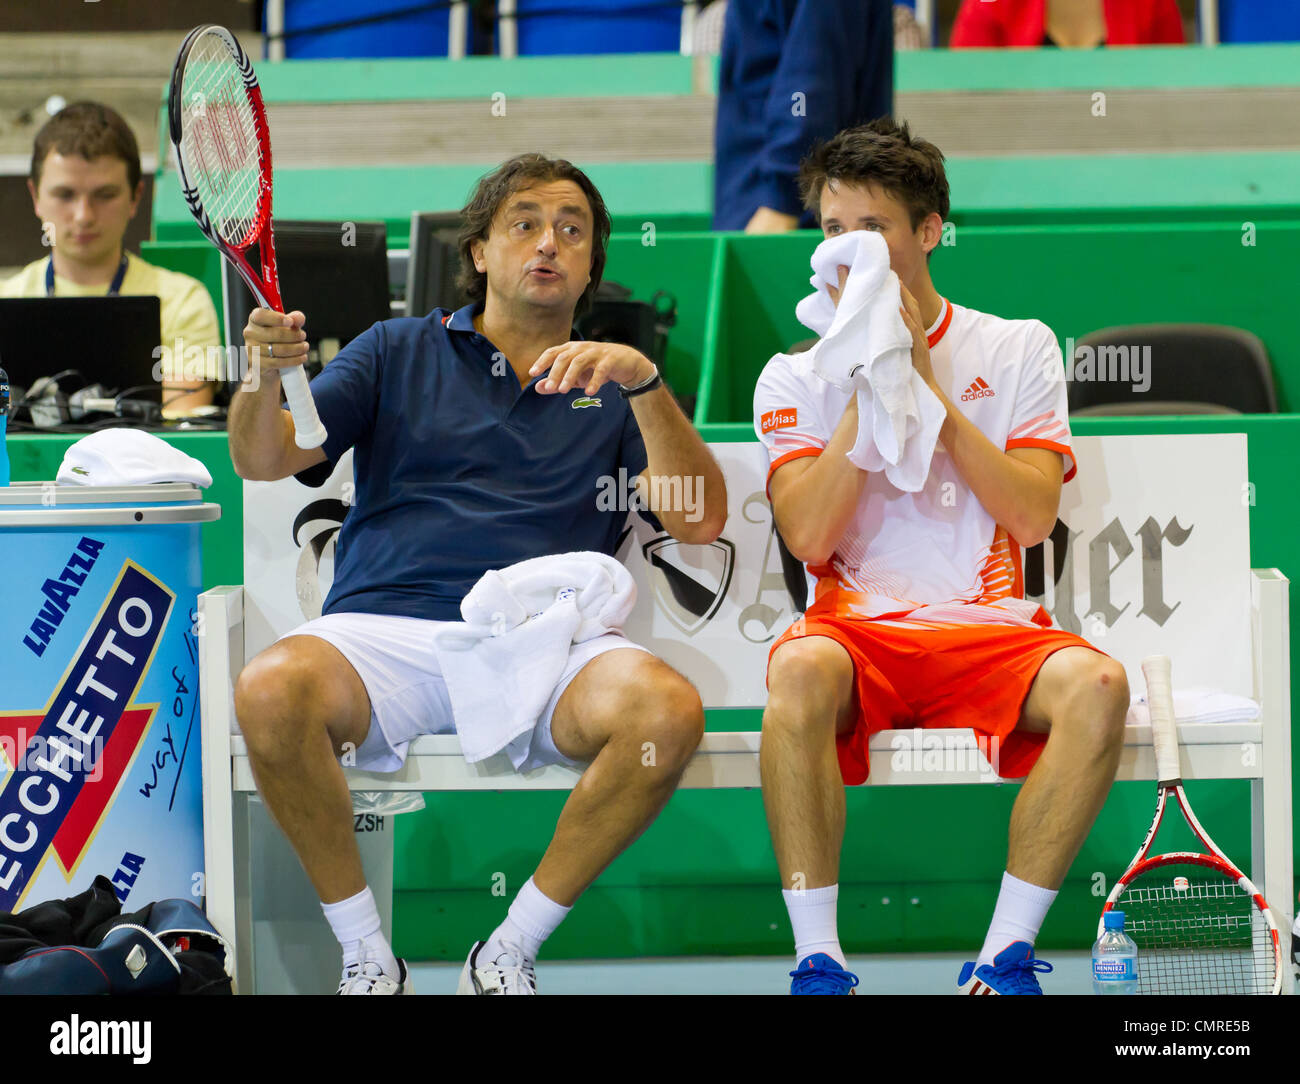 Henri Leconte (l.) gives advice to Julien Cagnina in double final of BNP Paribas Open Champions Tour in Zurich Stock Photo